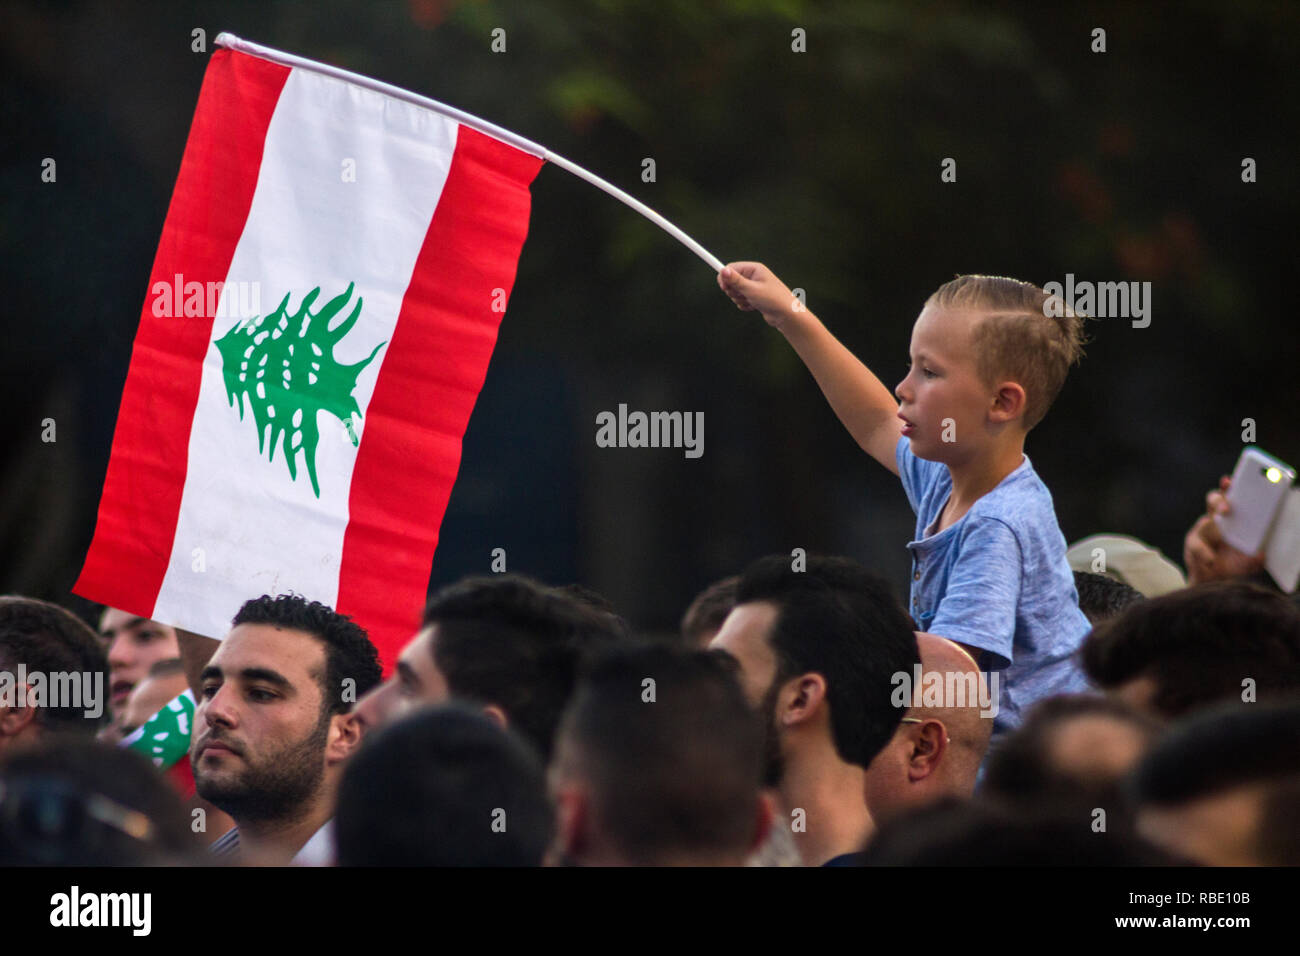 Beirut, Lebanon - August 29, 2015: A boy with the flag of Lebanon on a protest against trash crisis. Arabic spring protest in Beirut, Lebanon Stock Photo